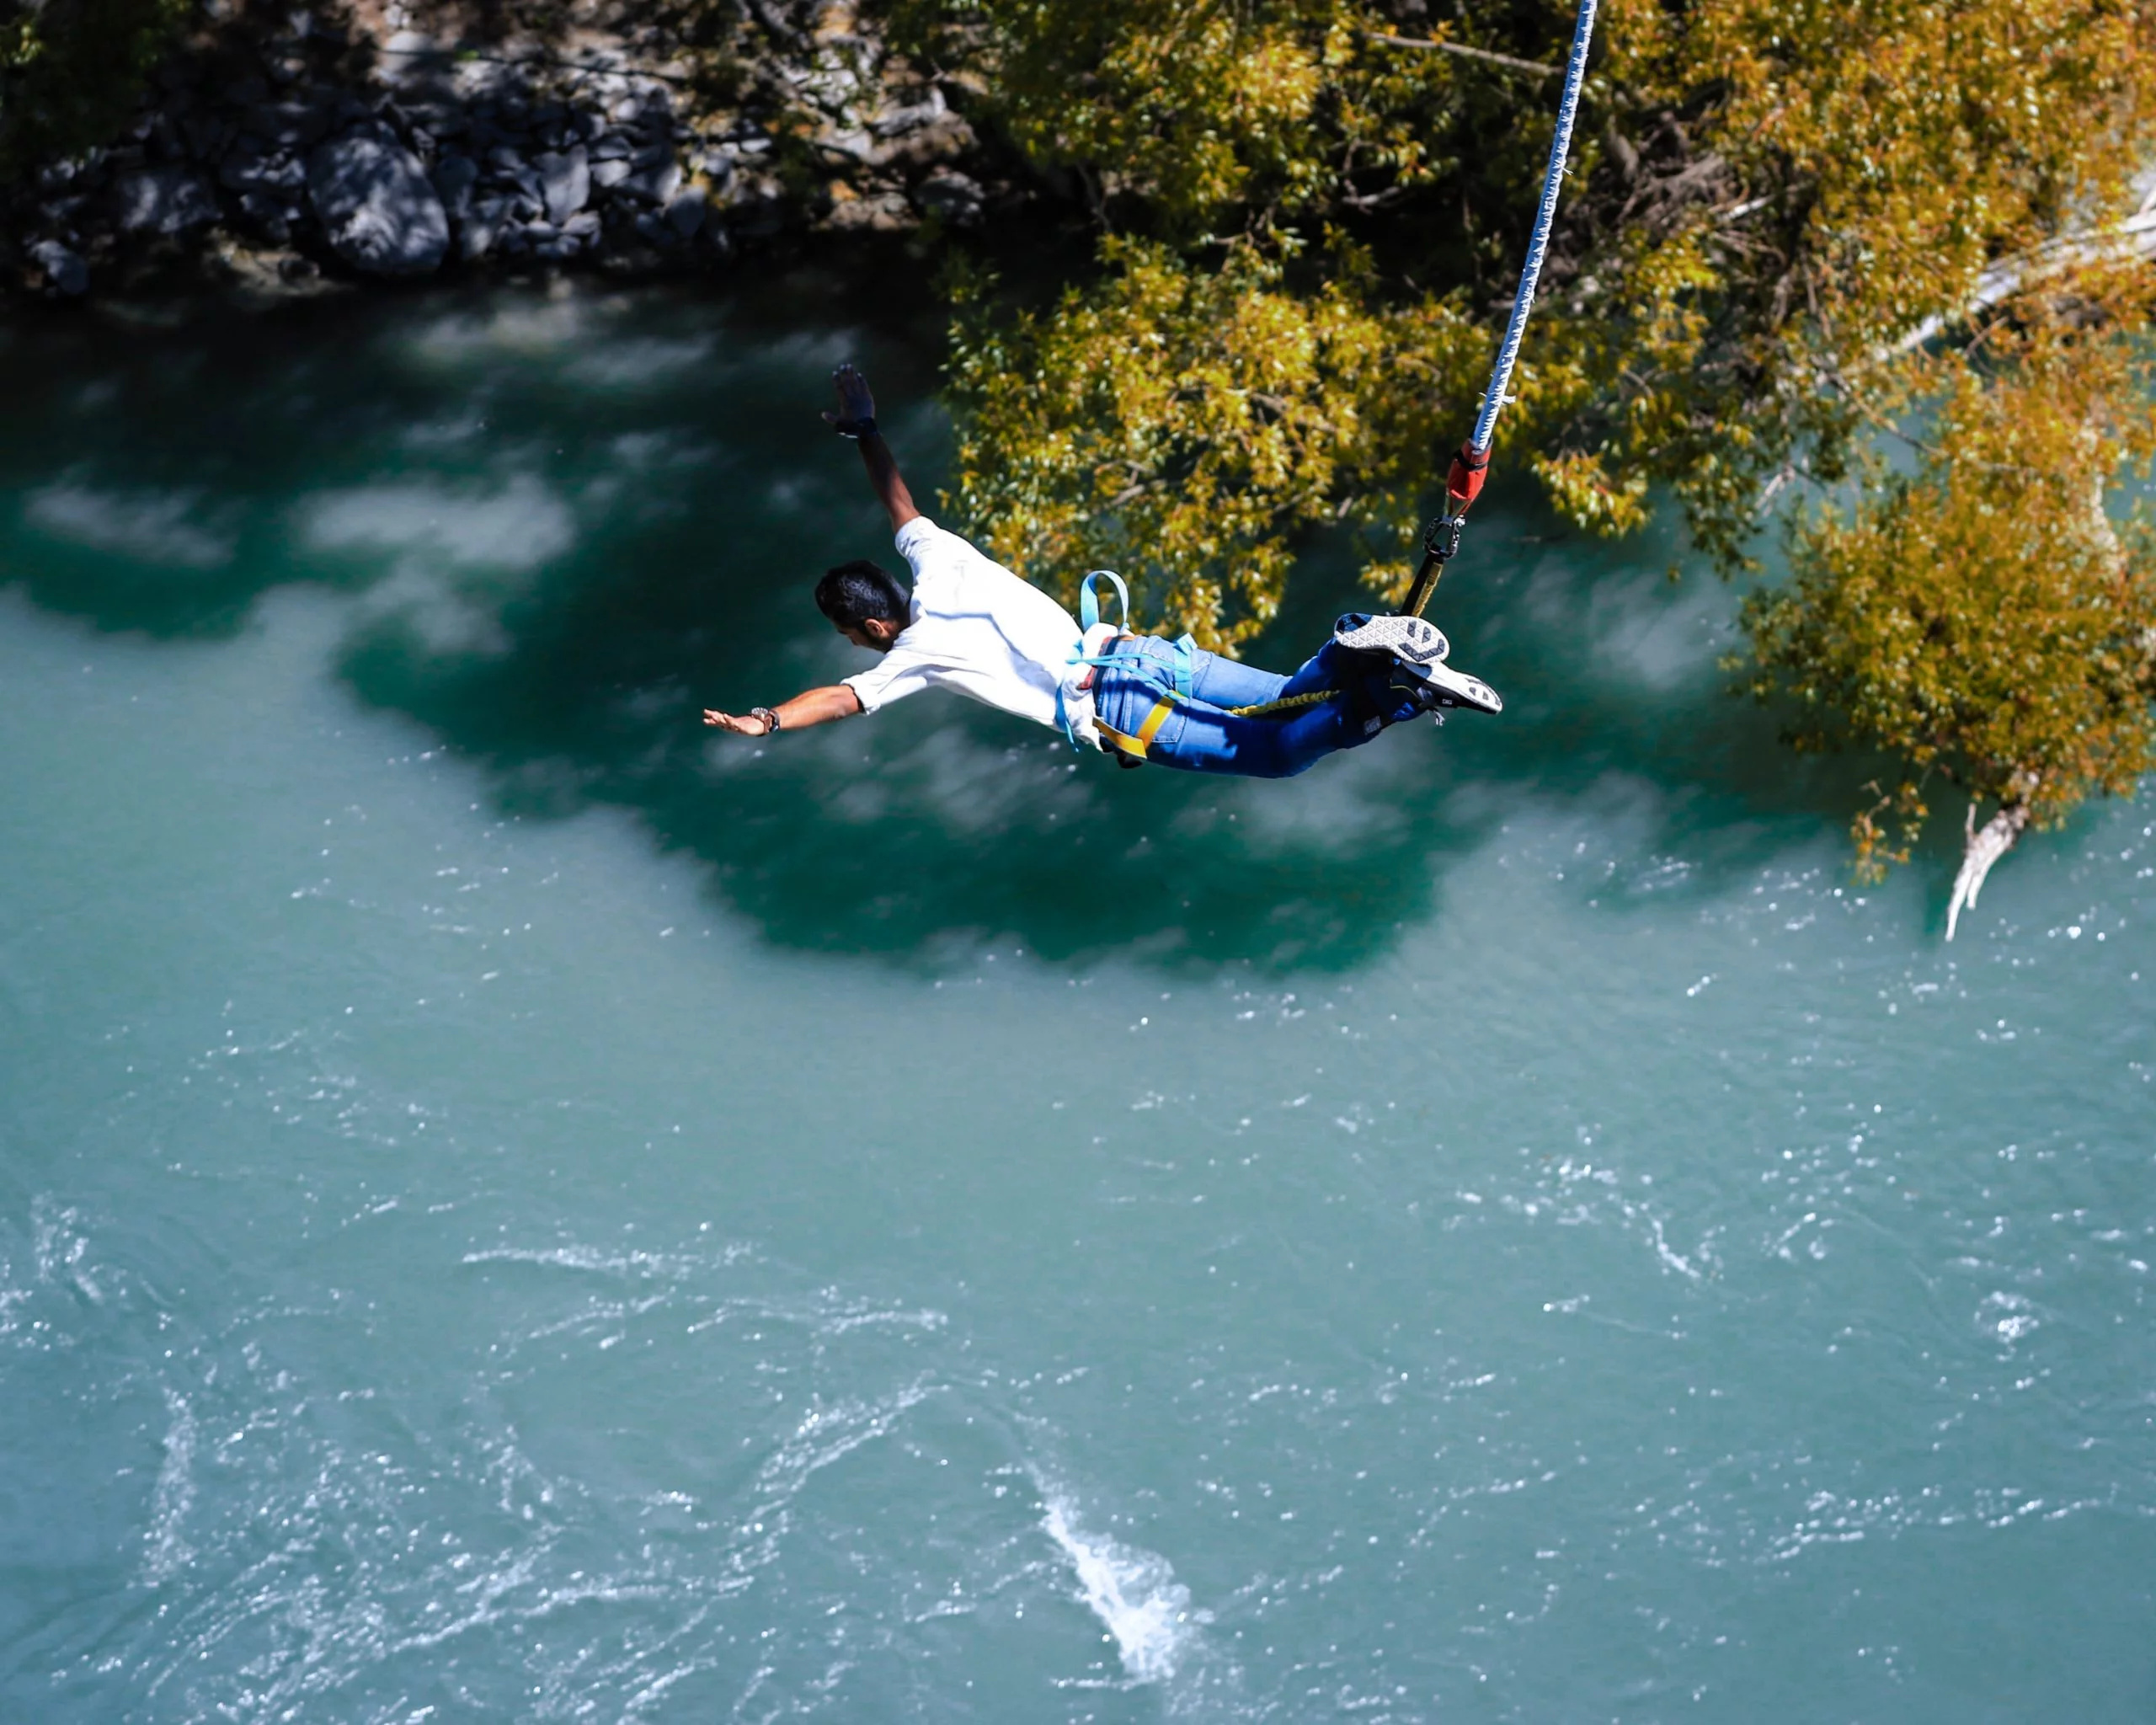 Bungee Jumping: Launching pad in India, A moment of free-fall above the whitewater, A thrilling extreme. 2560x2050 HD Background.